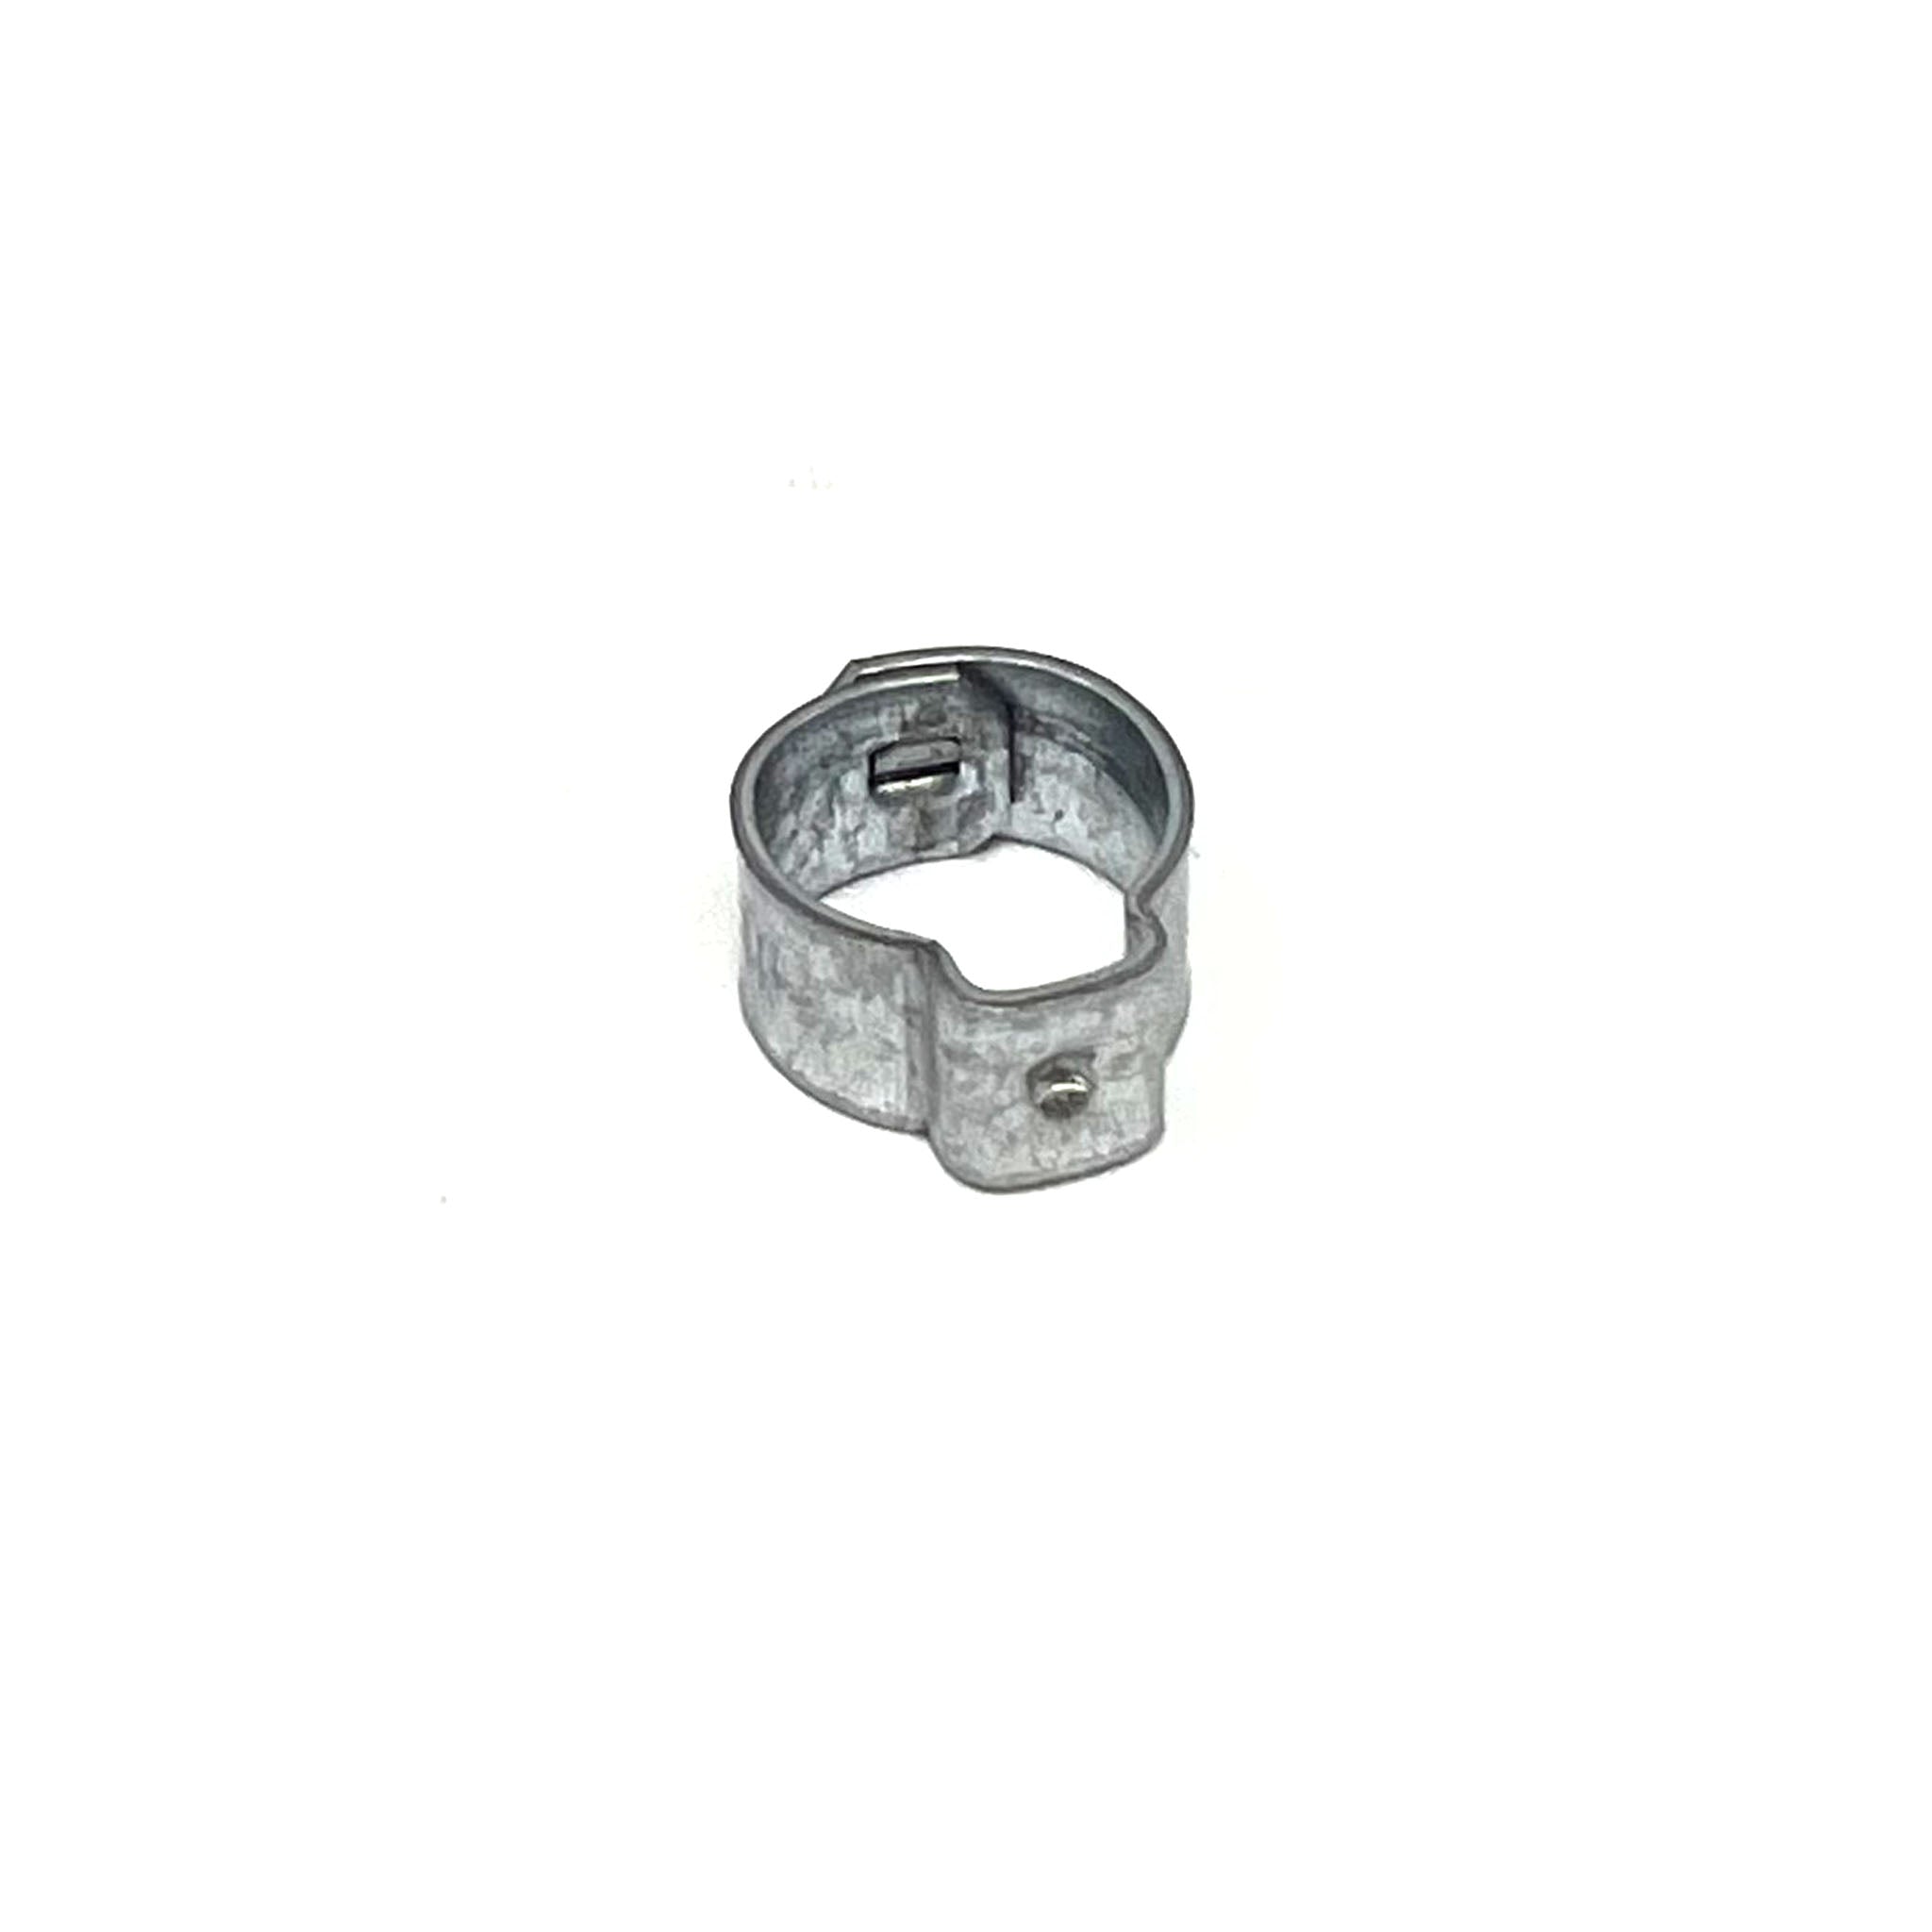 7/16" Pinch Hose Clamps (.381" - 7/16") 9.7-11.3MM